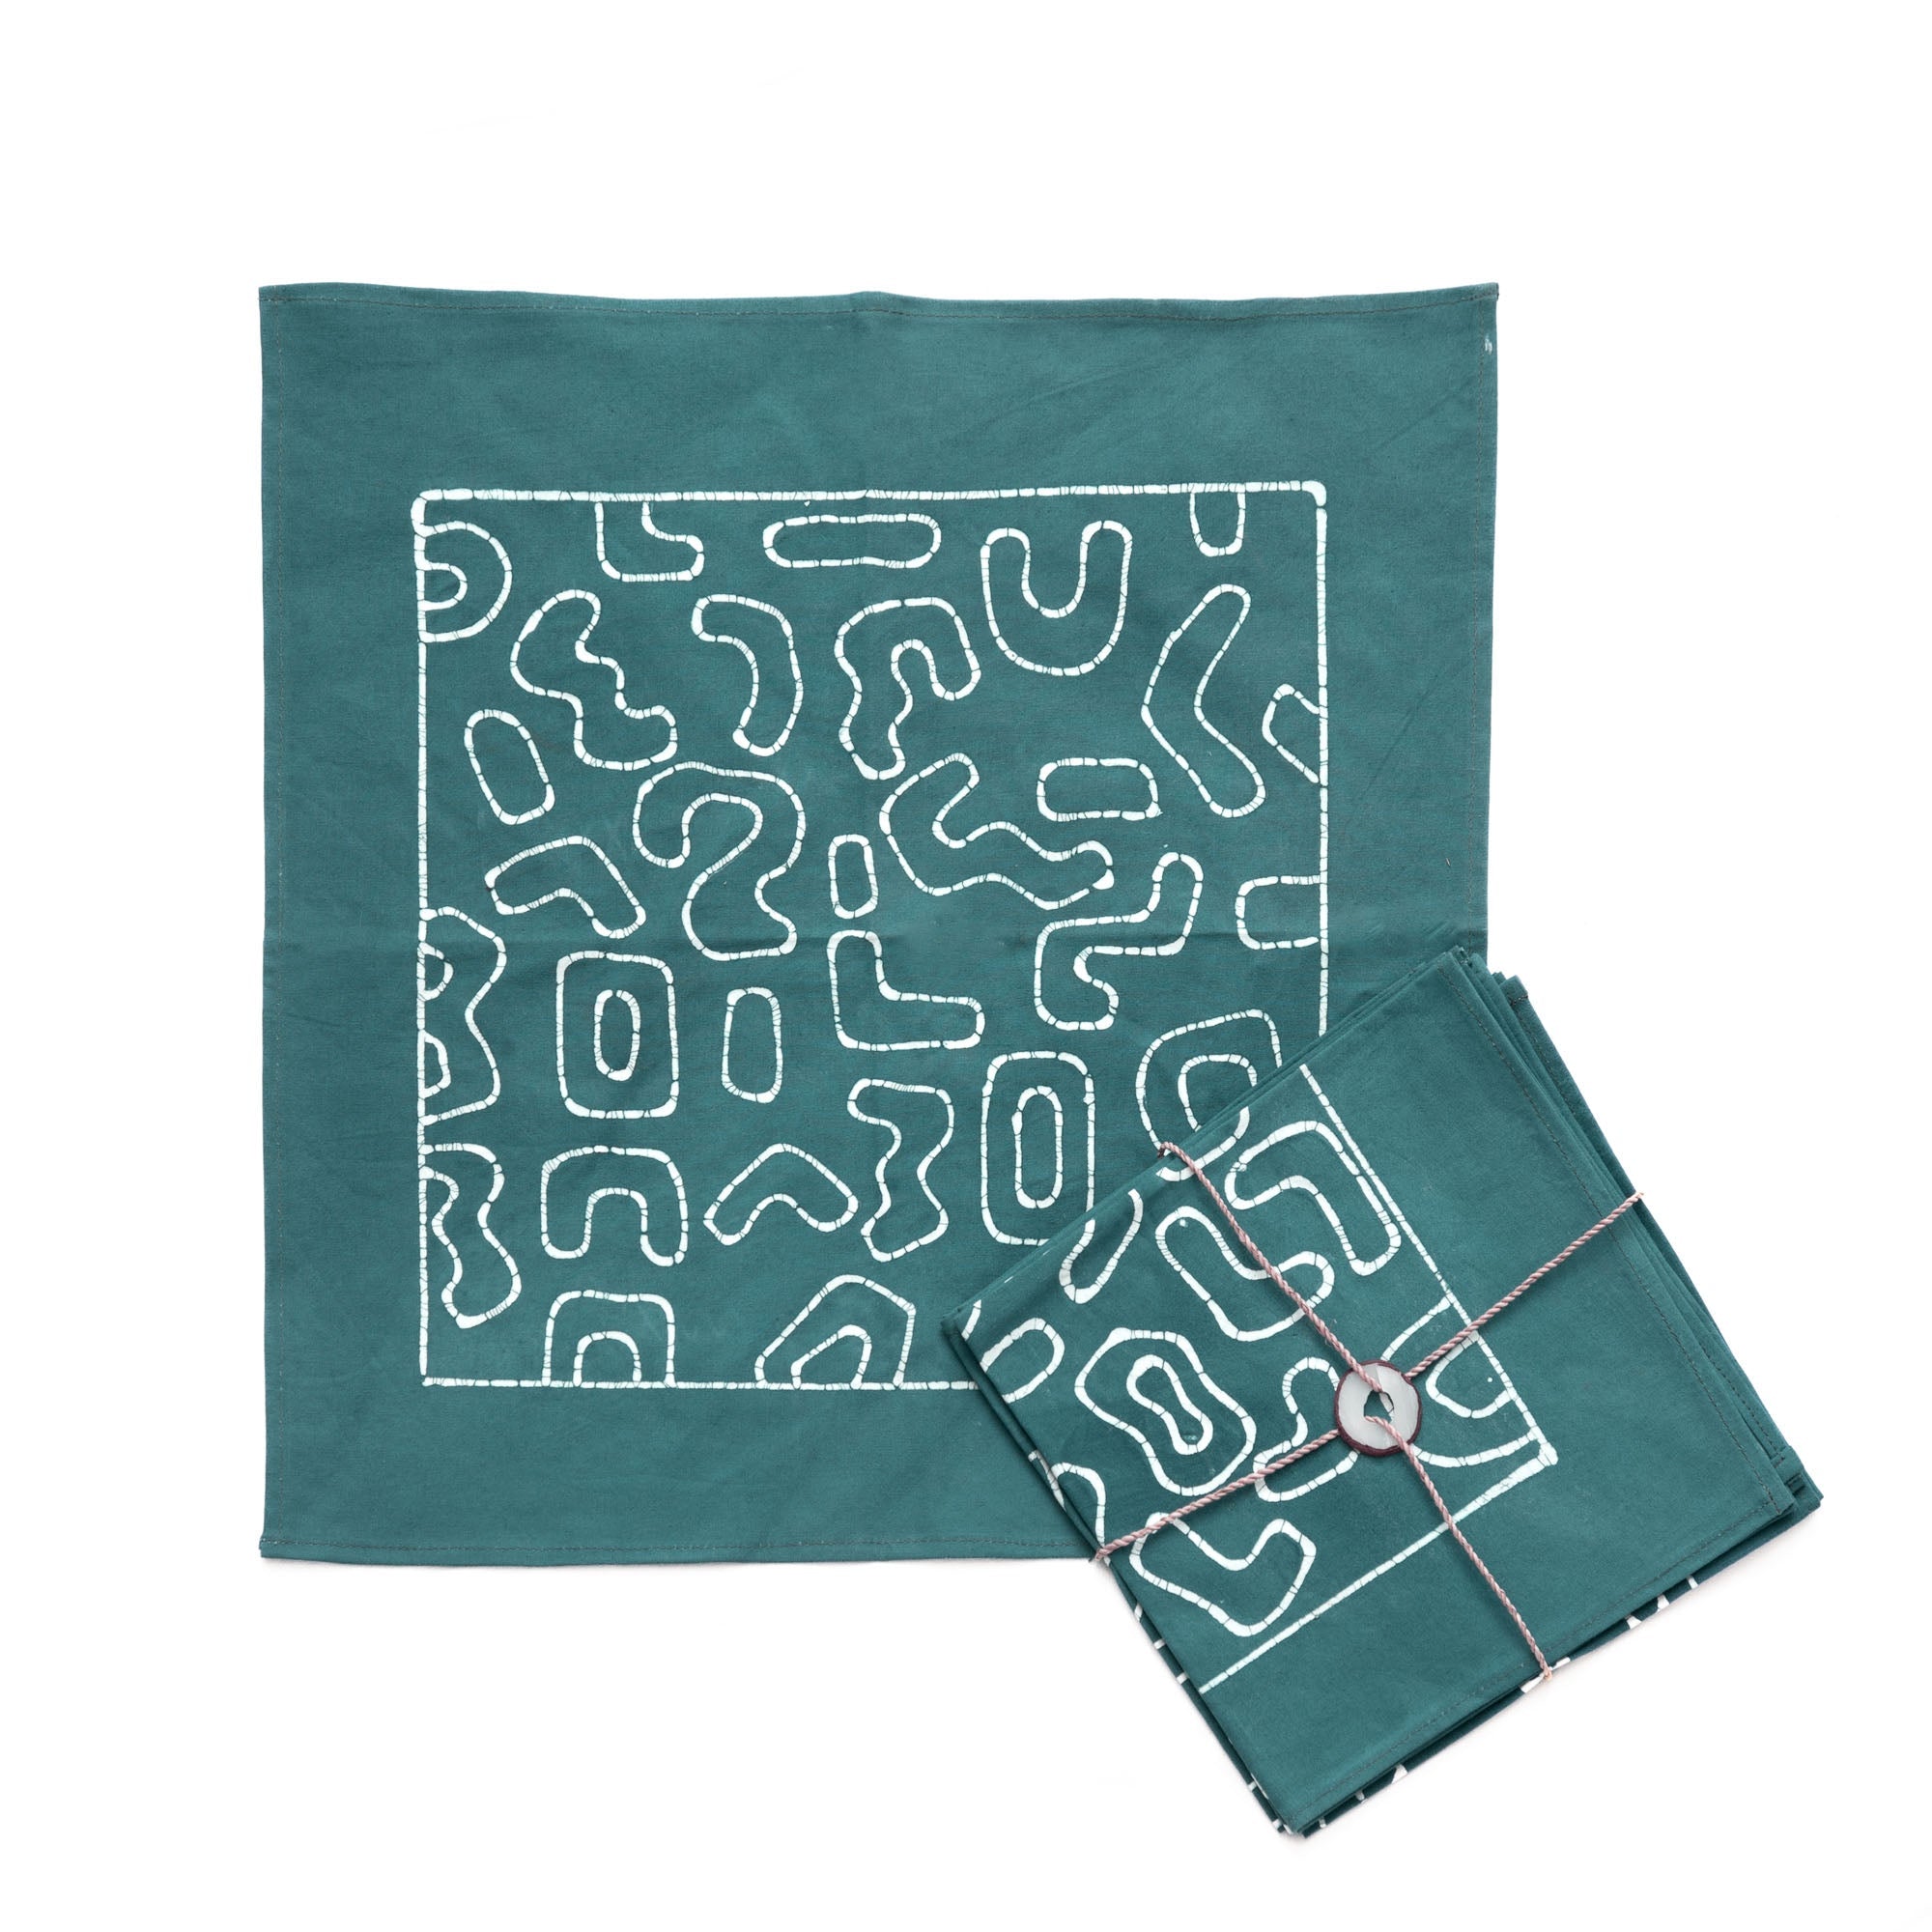 The perfect teal napkins, adorned in an intricate African inspired pattern destined to add colour to your sustainable style.